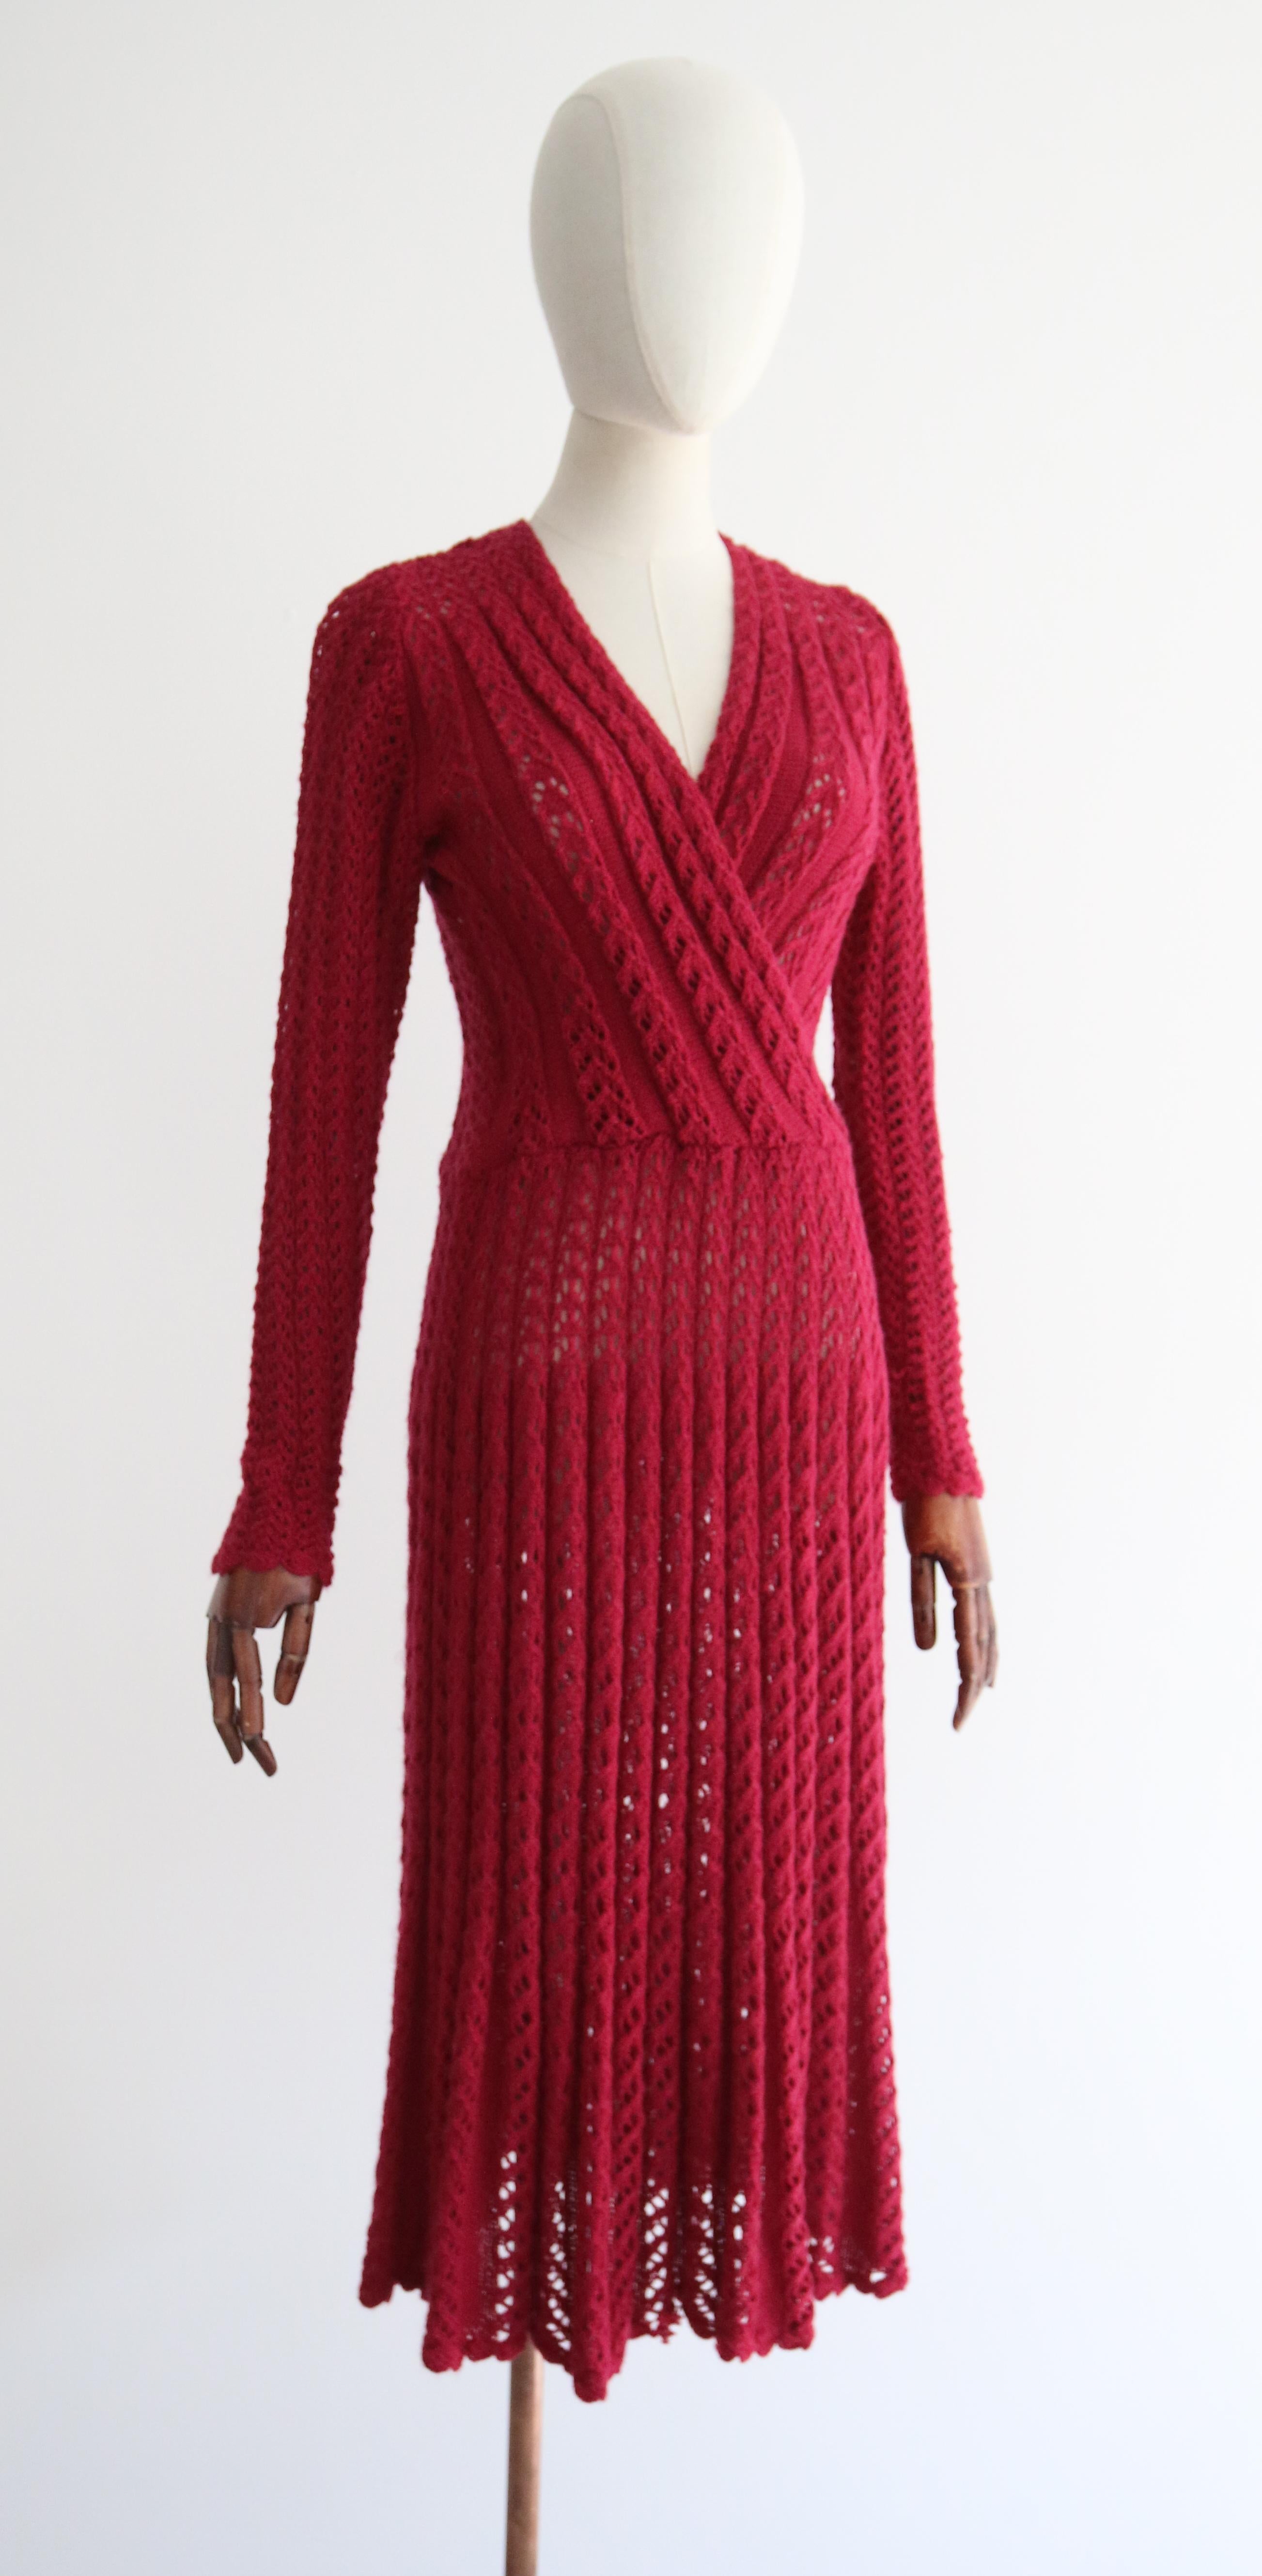 Vintage 1940's Magenta Knitted Dress UK 10-12 US 6-8 In Good Condition For Sale In Cheltenham, GB